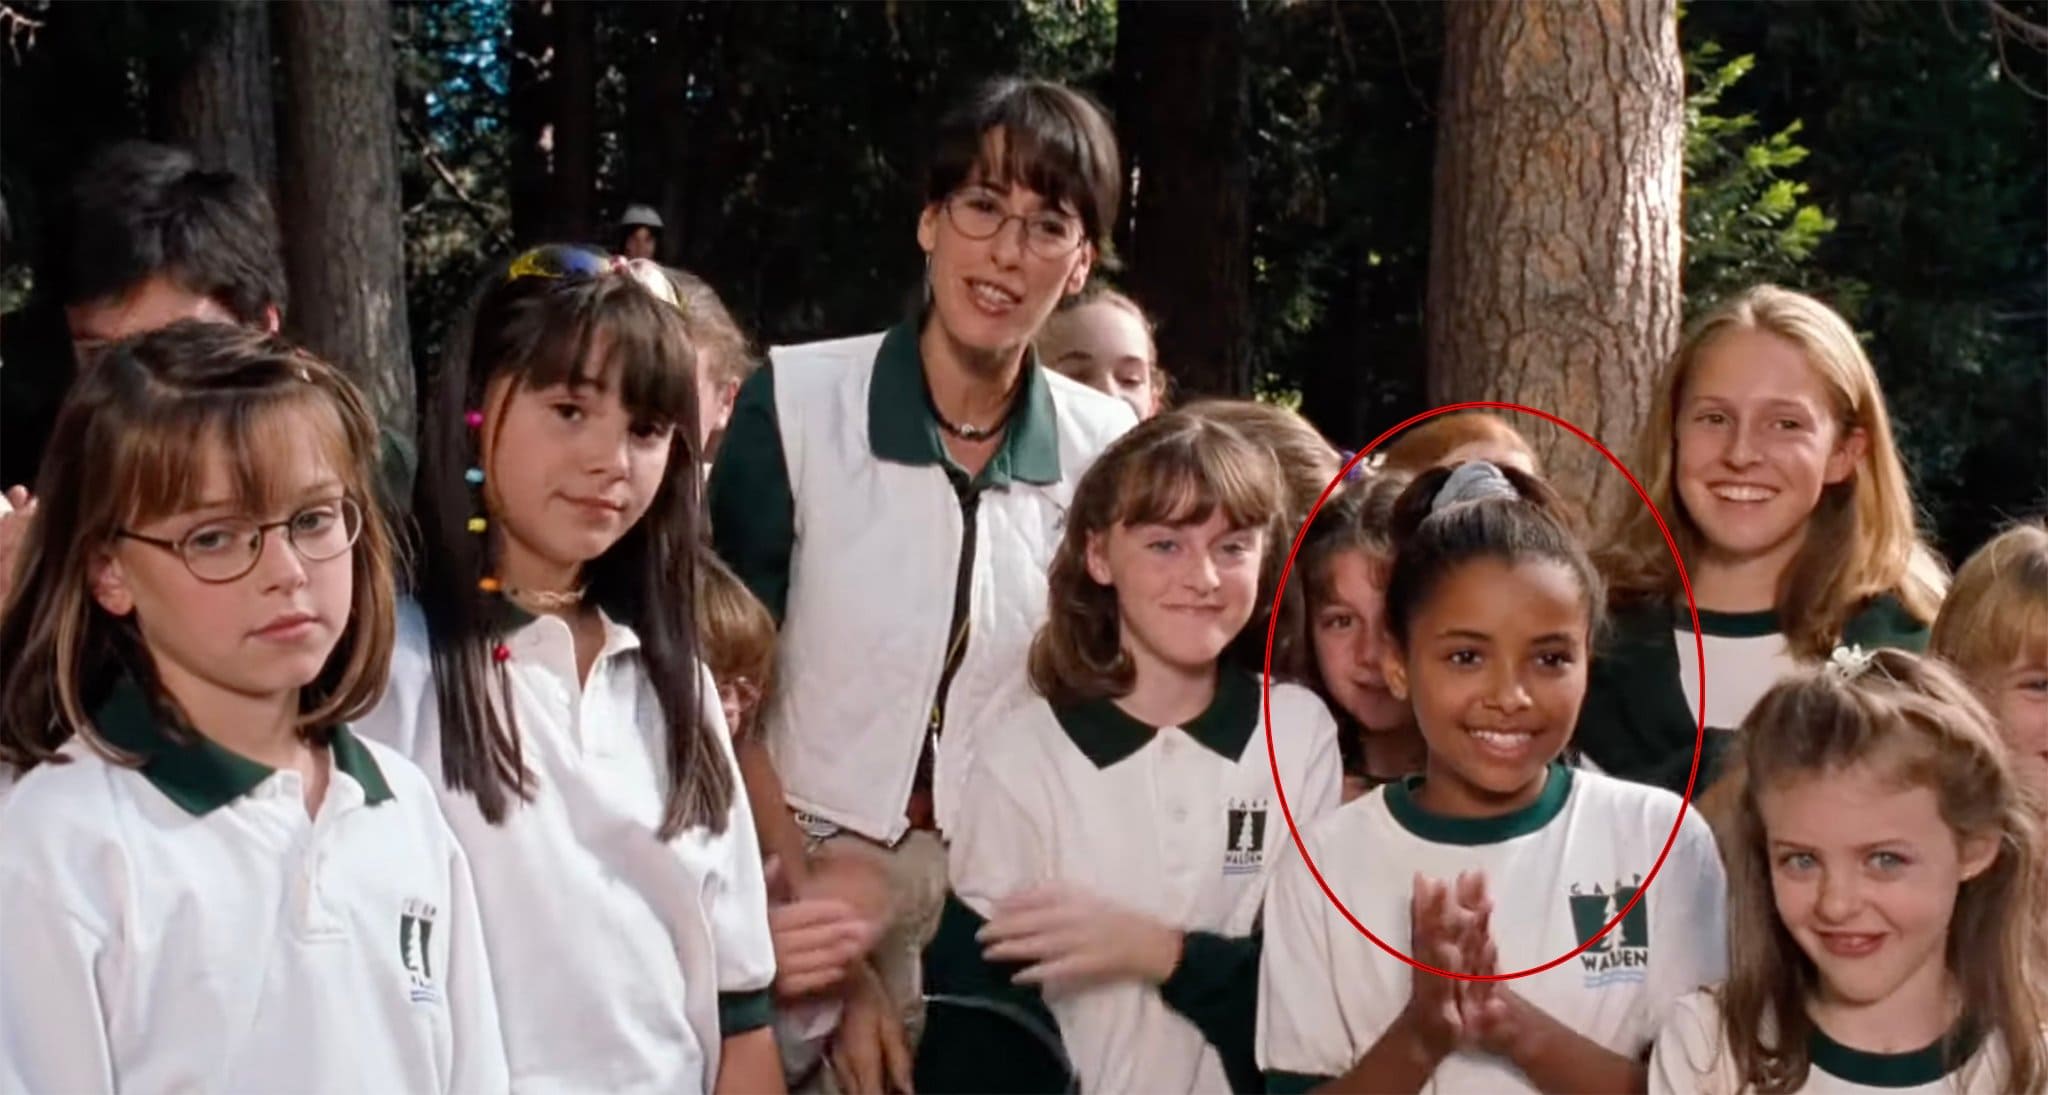 Kat Graham played the role of Jackie, Annie's accomplice, in The Parent Trap